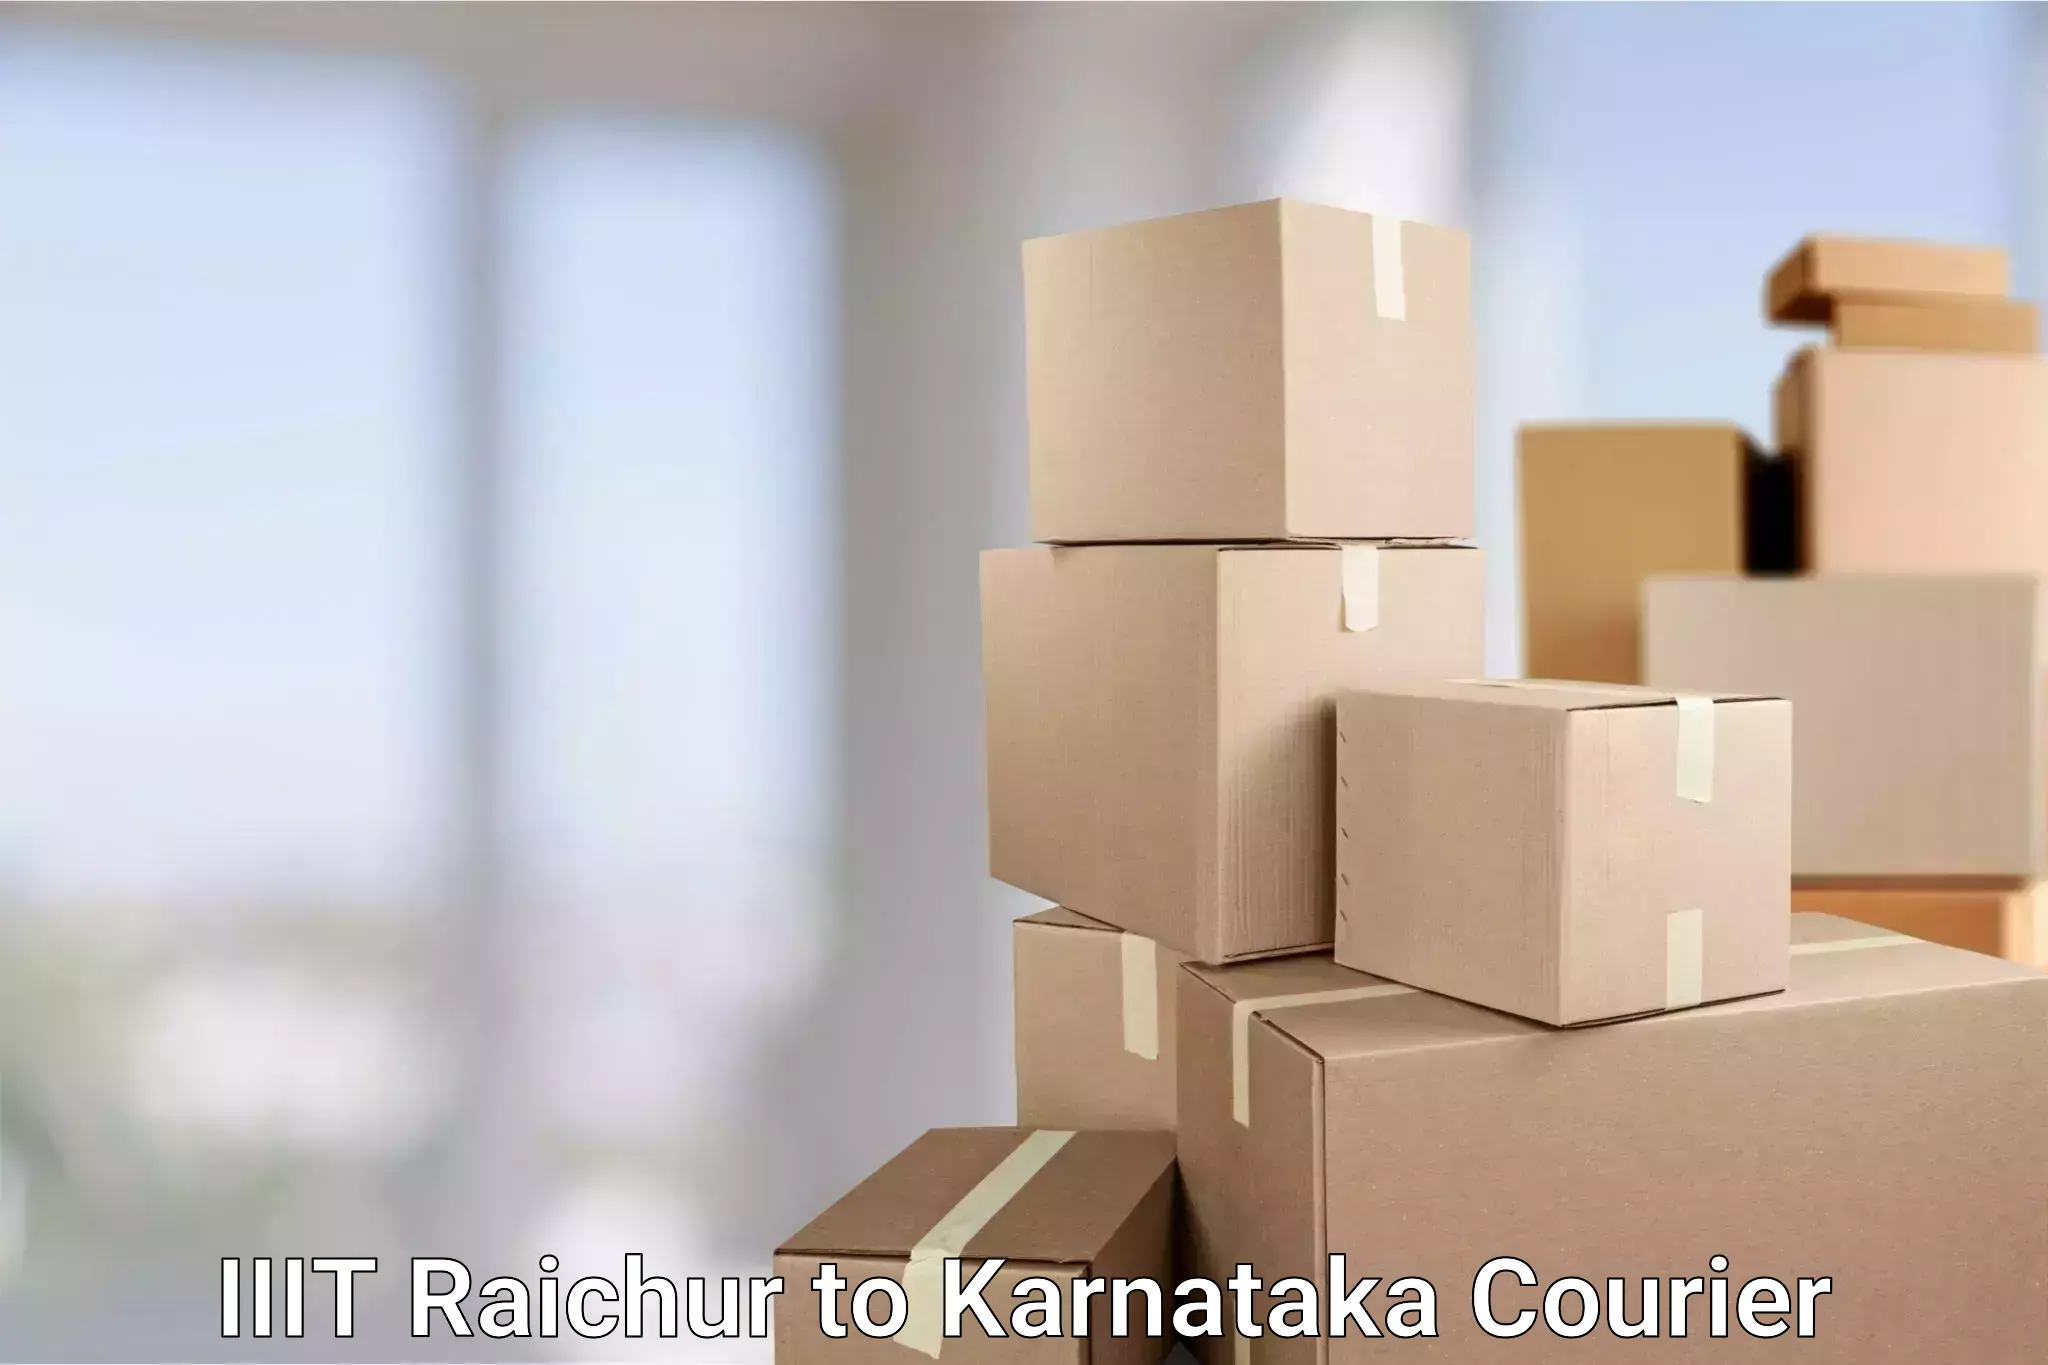 Express package delivery IIIT Raichur to Hangal